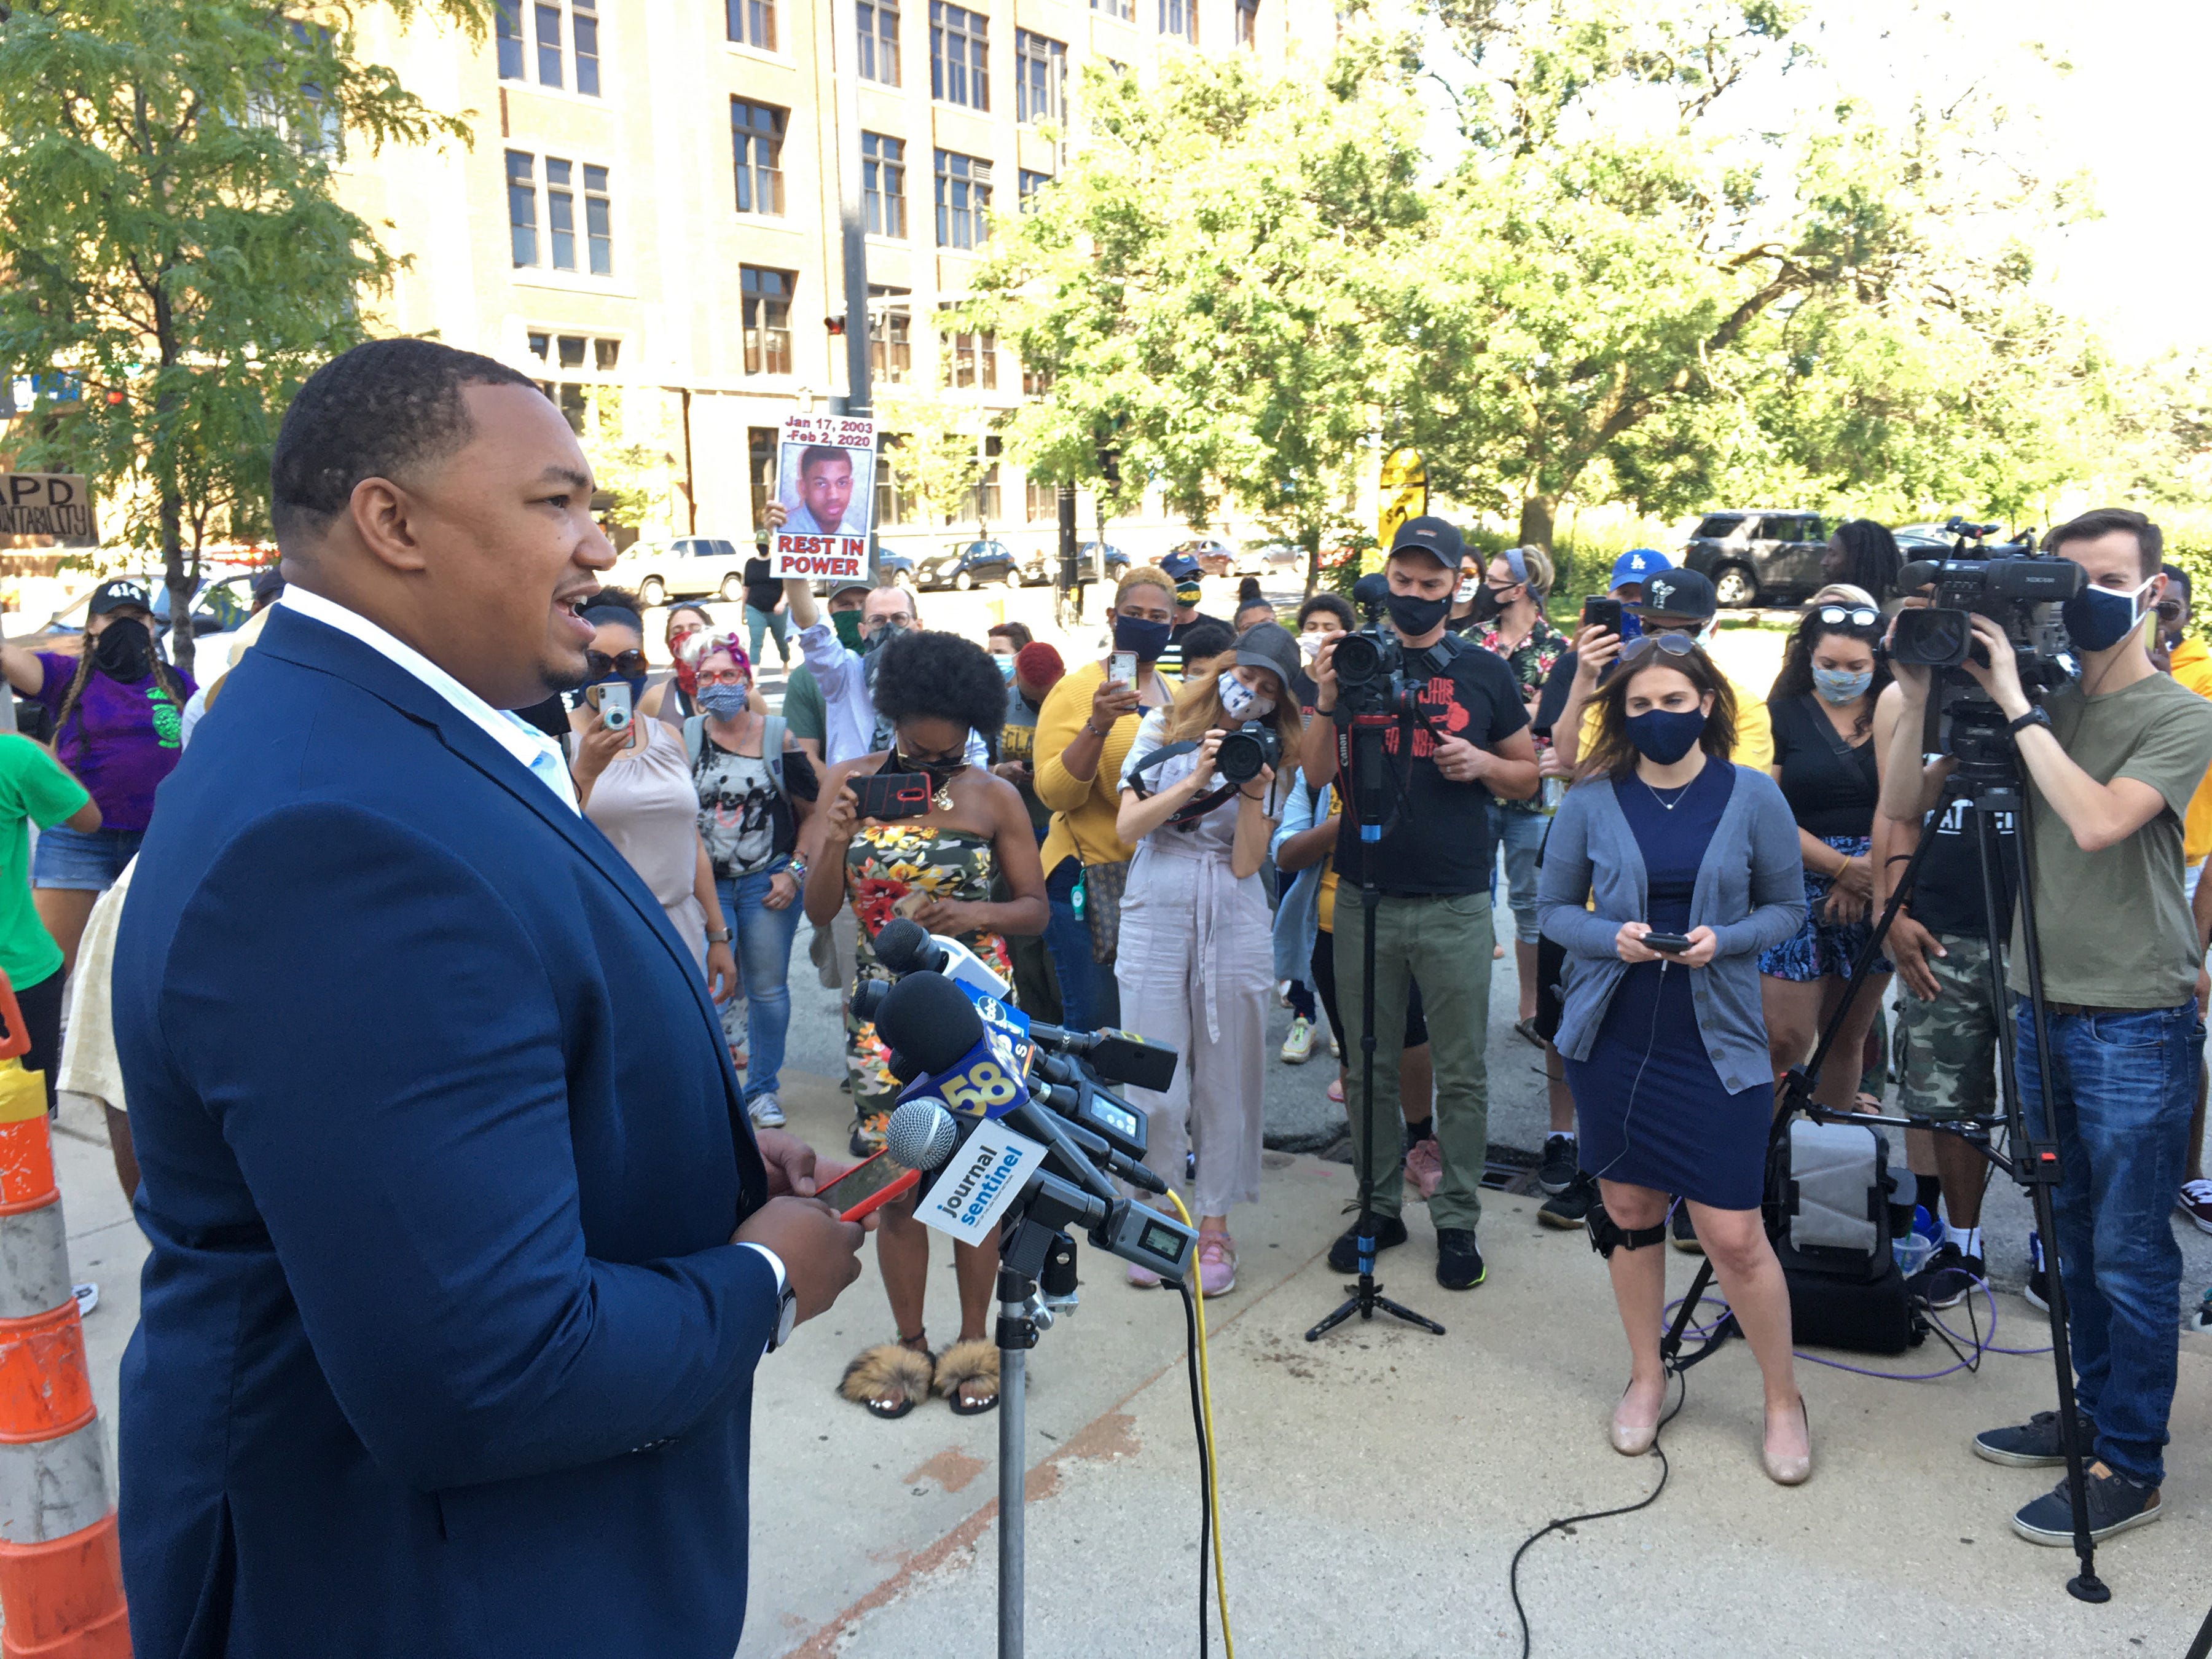 Steven DeVougas, then chair of the Fire and Police Commission, convened a news conference in August 2020 to assert that he was being targeted because of his race and his work for reform.